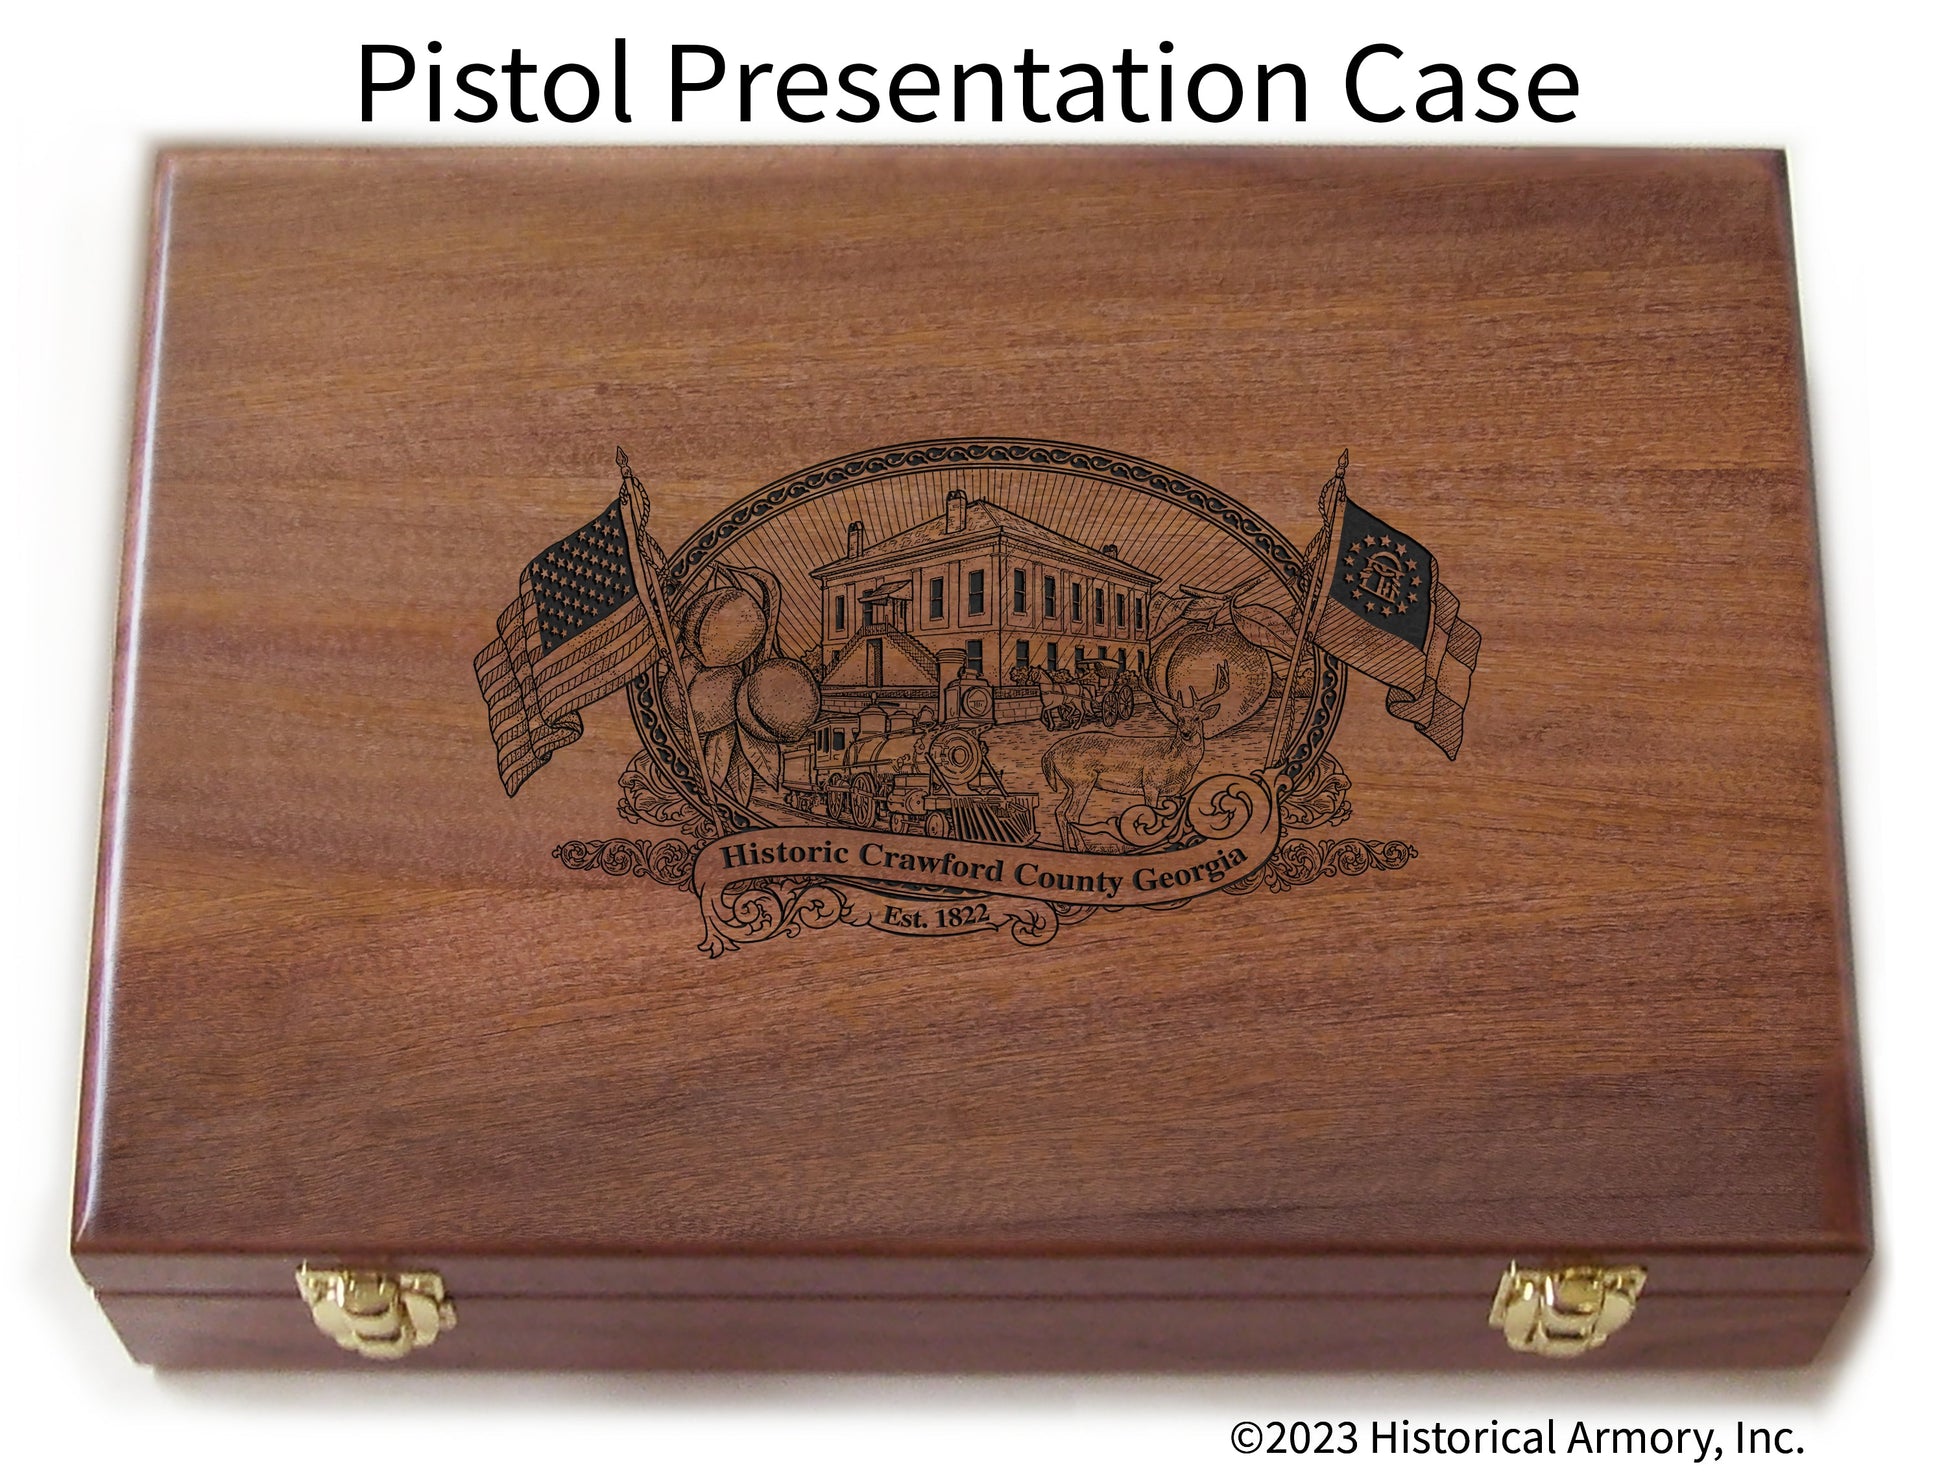 Crawford County Georgia Engraved .45 Auto Ruger 1911 Presentation Case